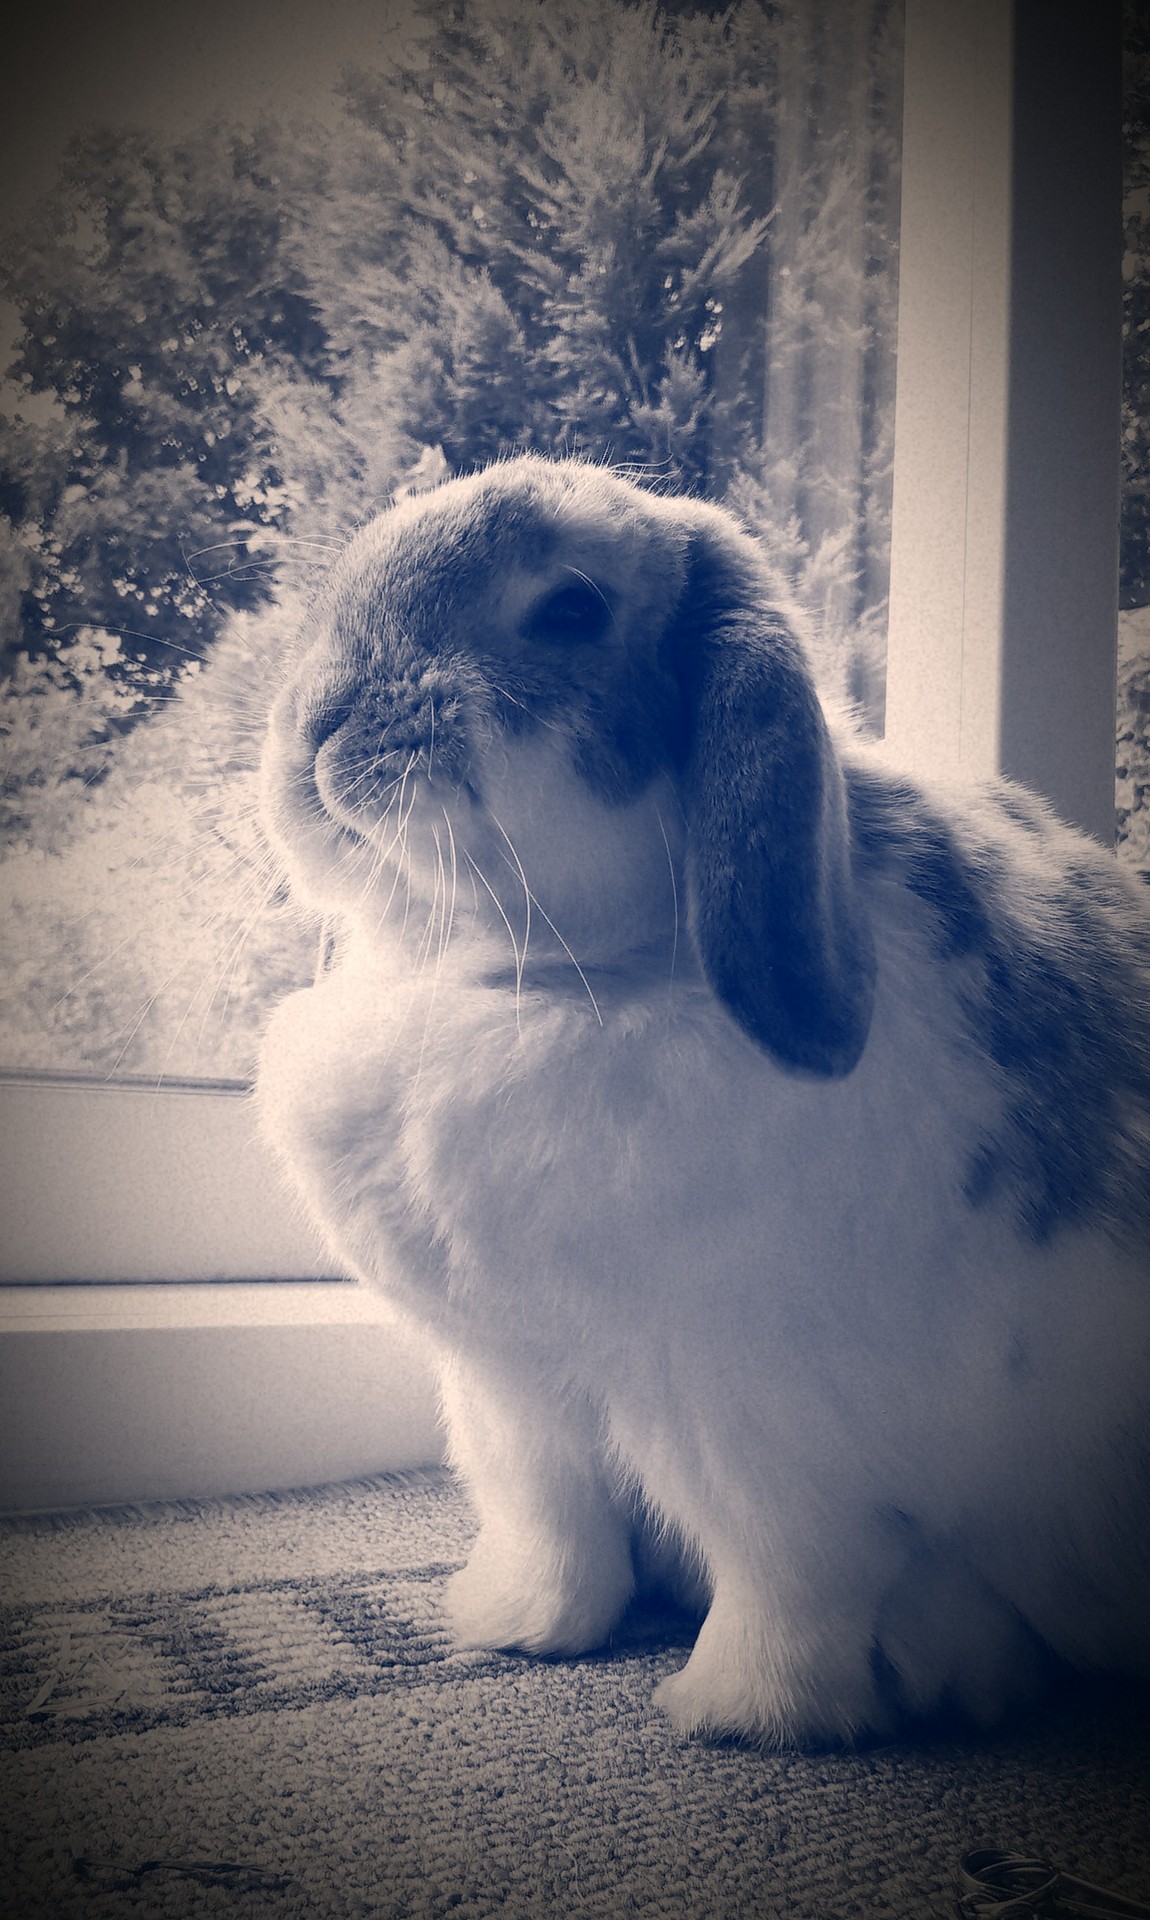 Bunny Is Stoic and Proud